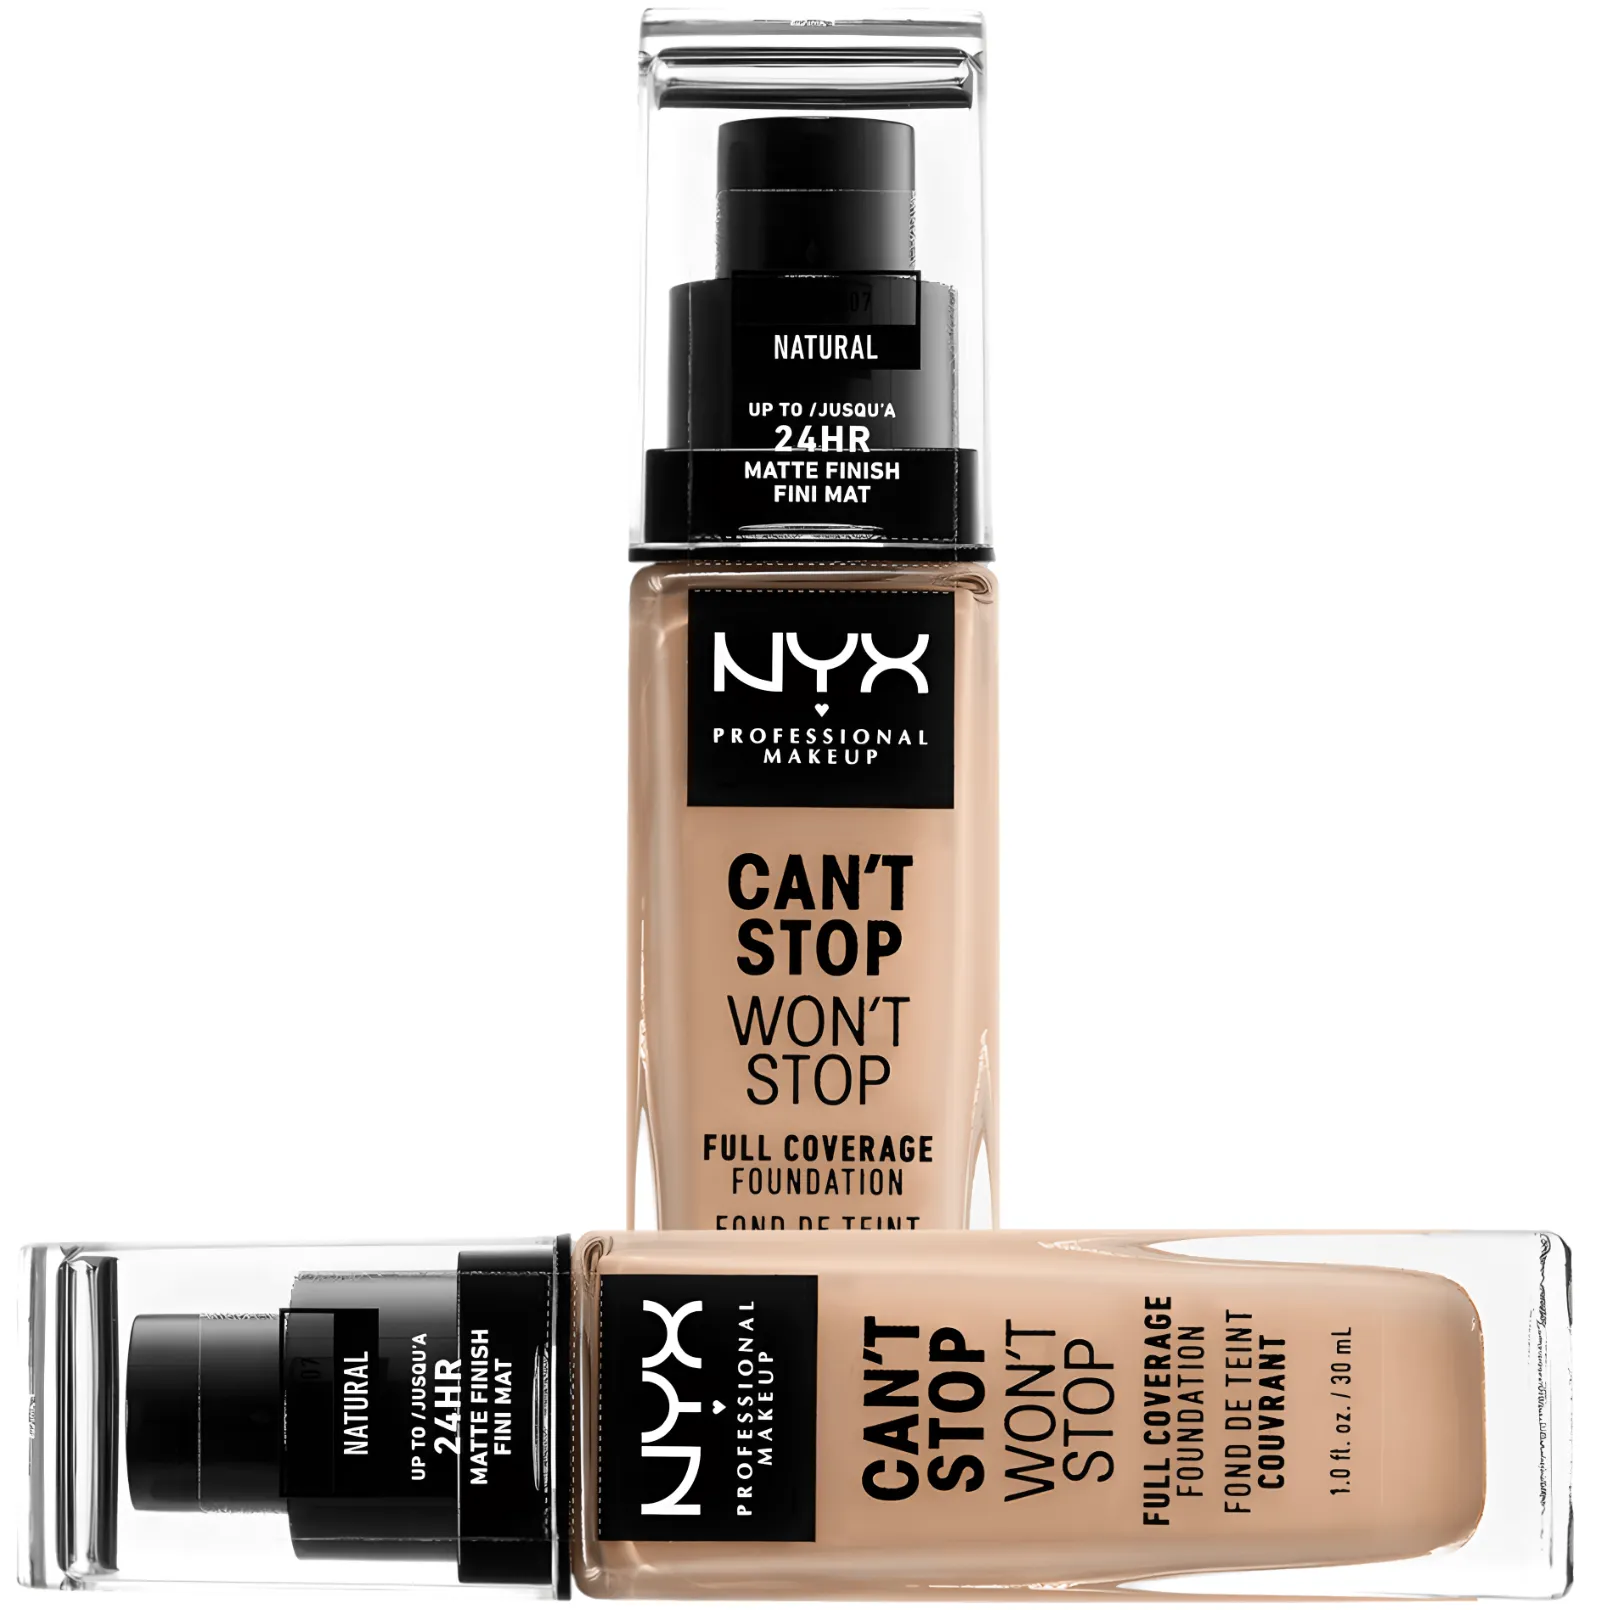 Free NYX Makeup Products